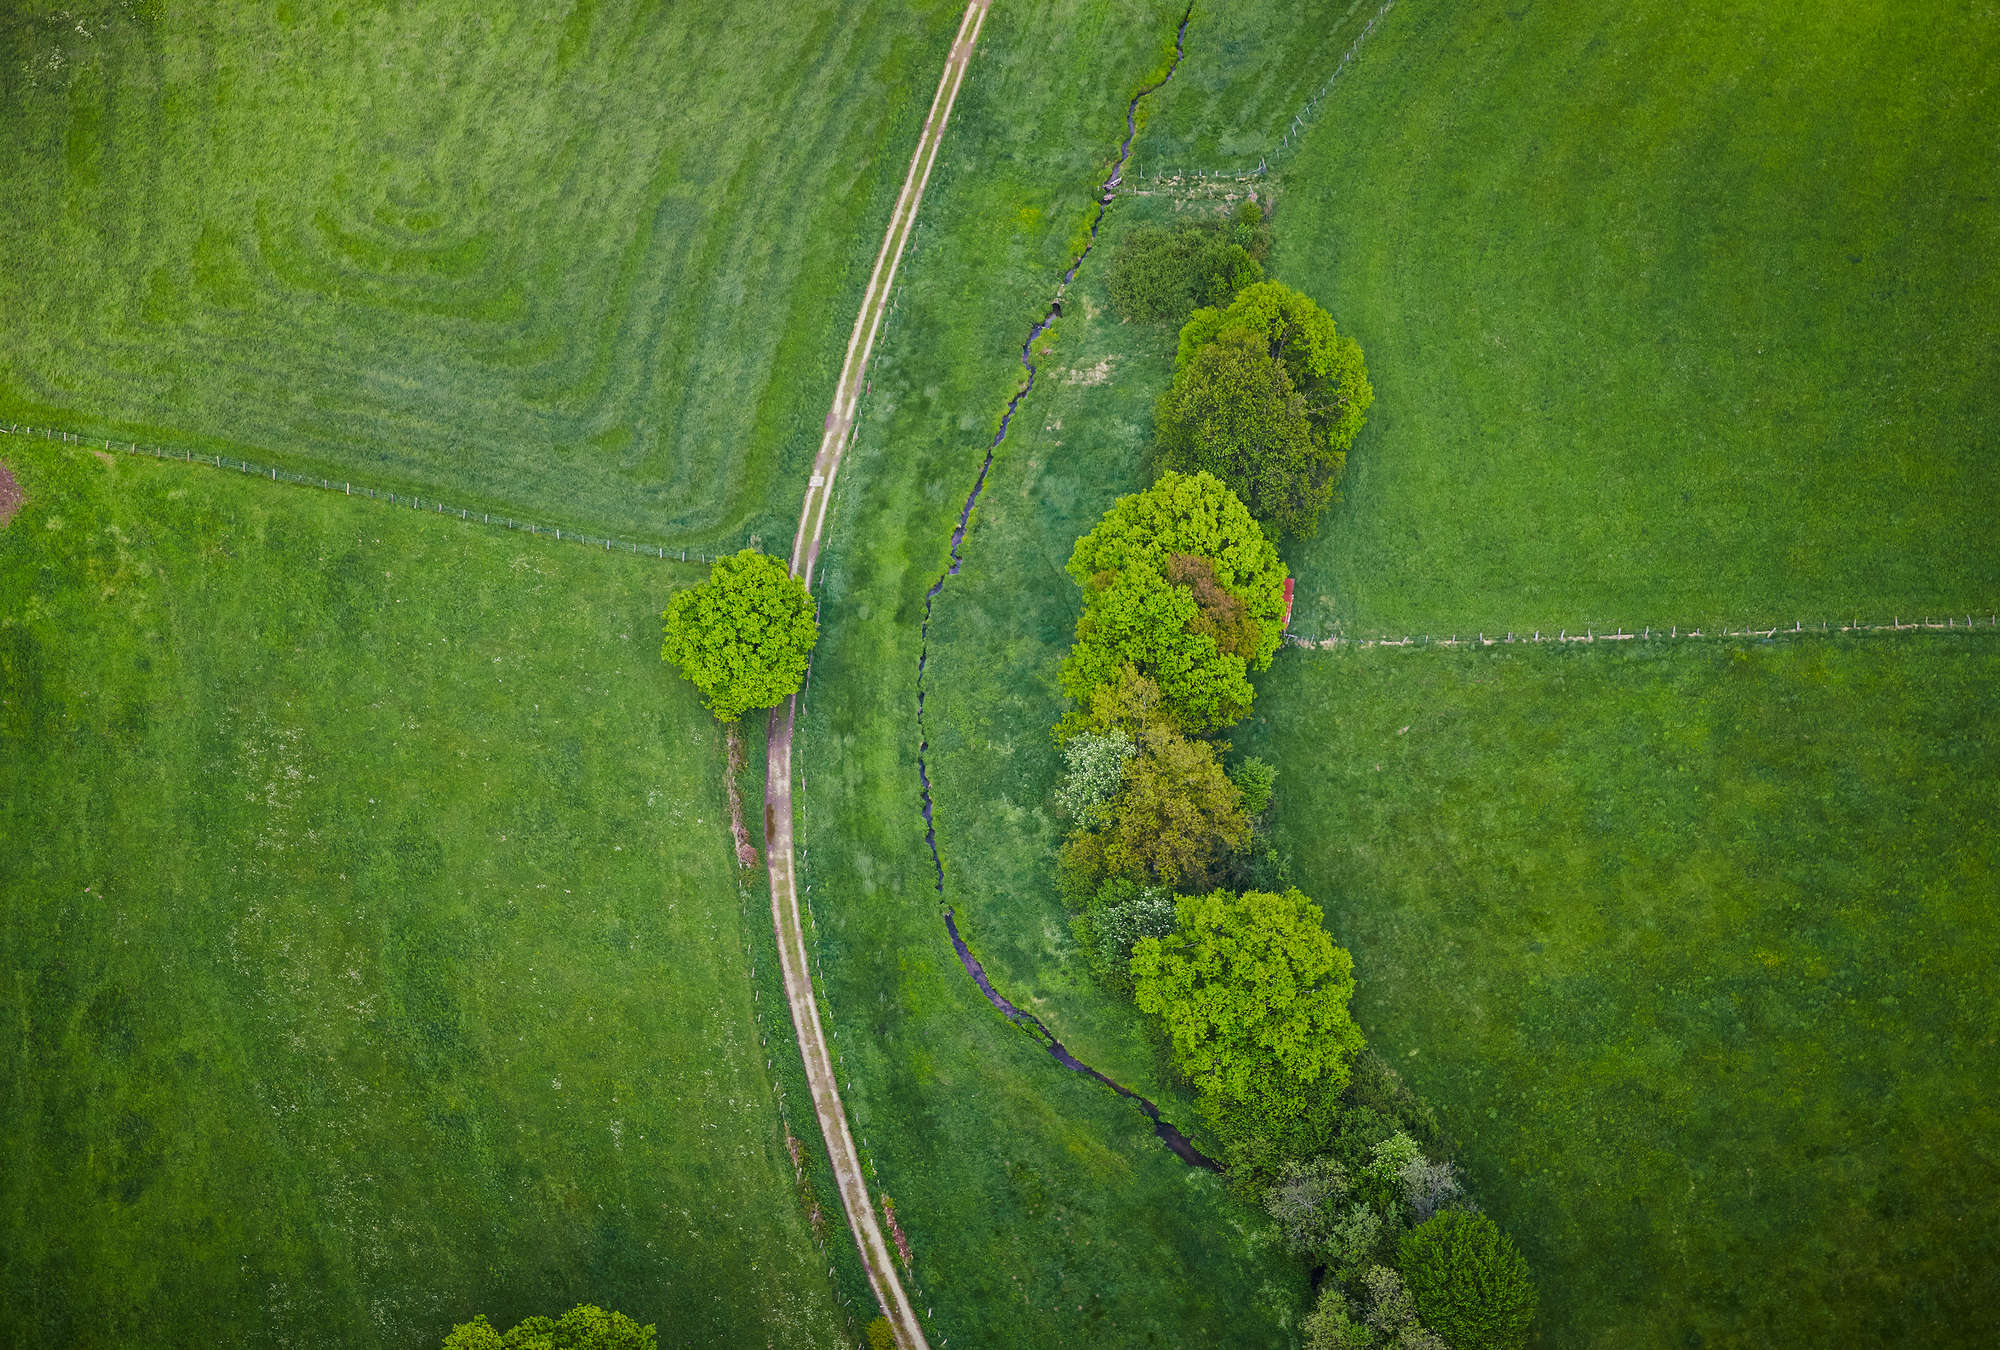             Grass landscape from bird's eye view - field with trees
        